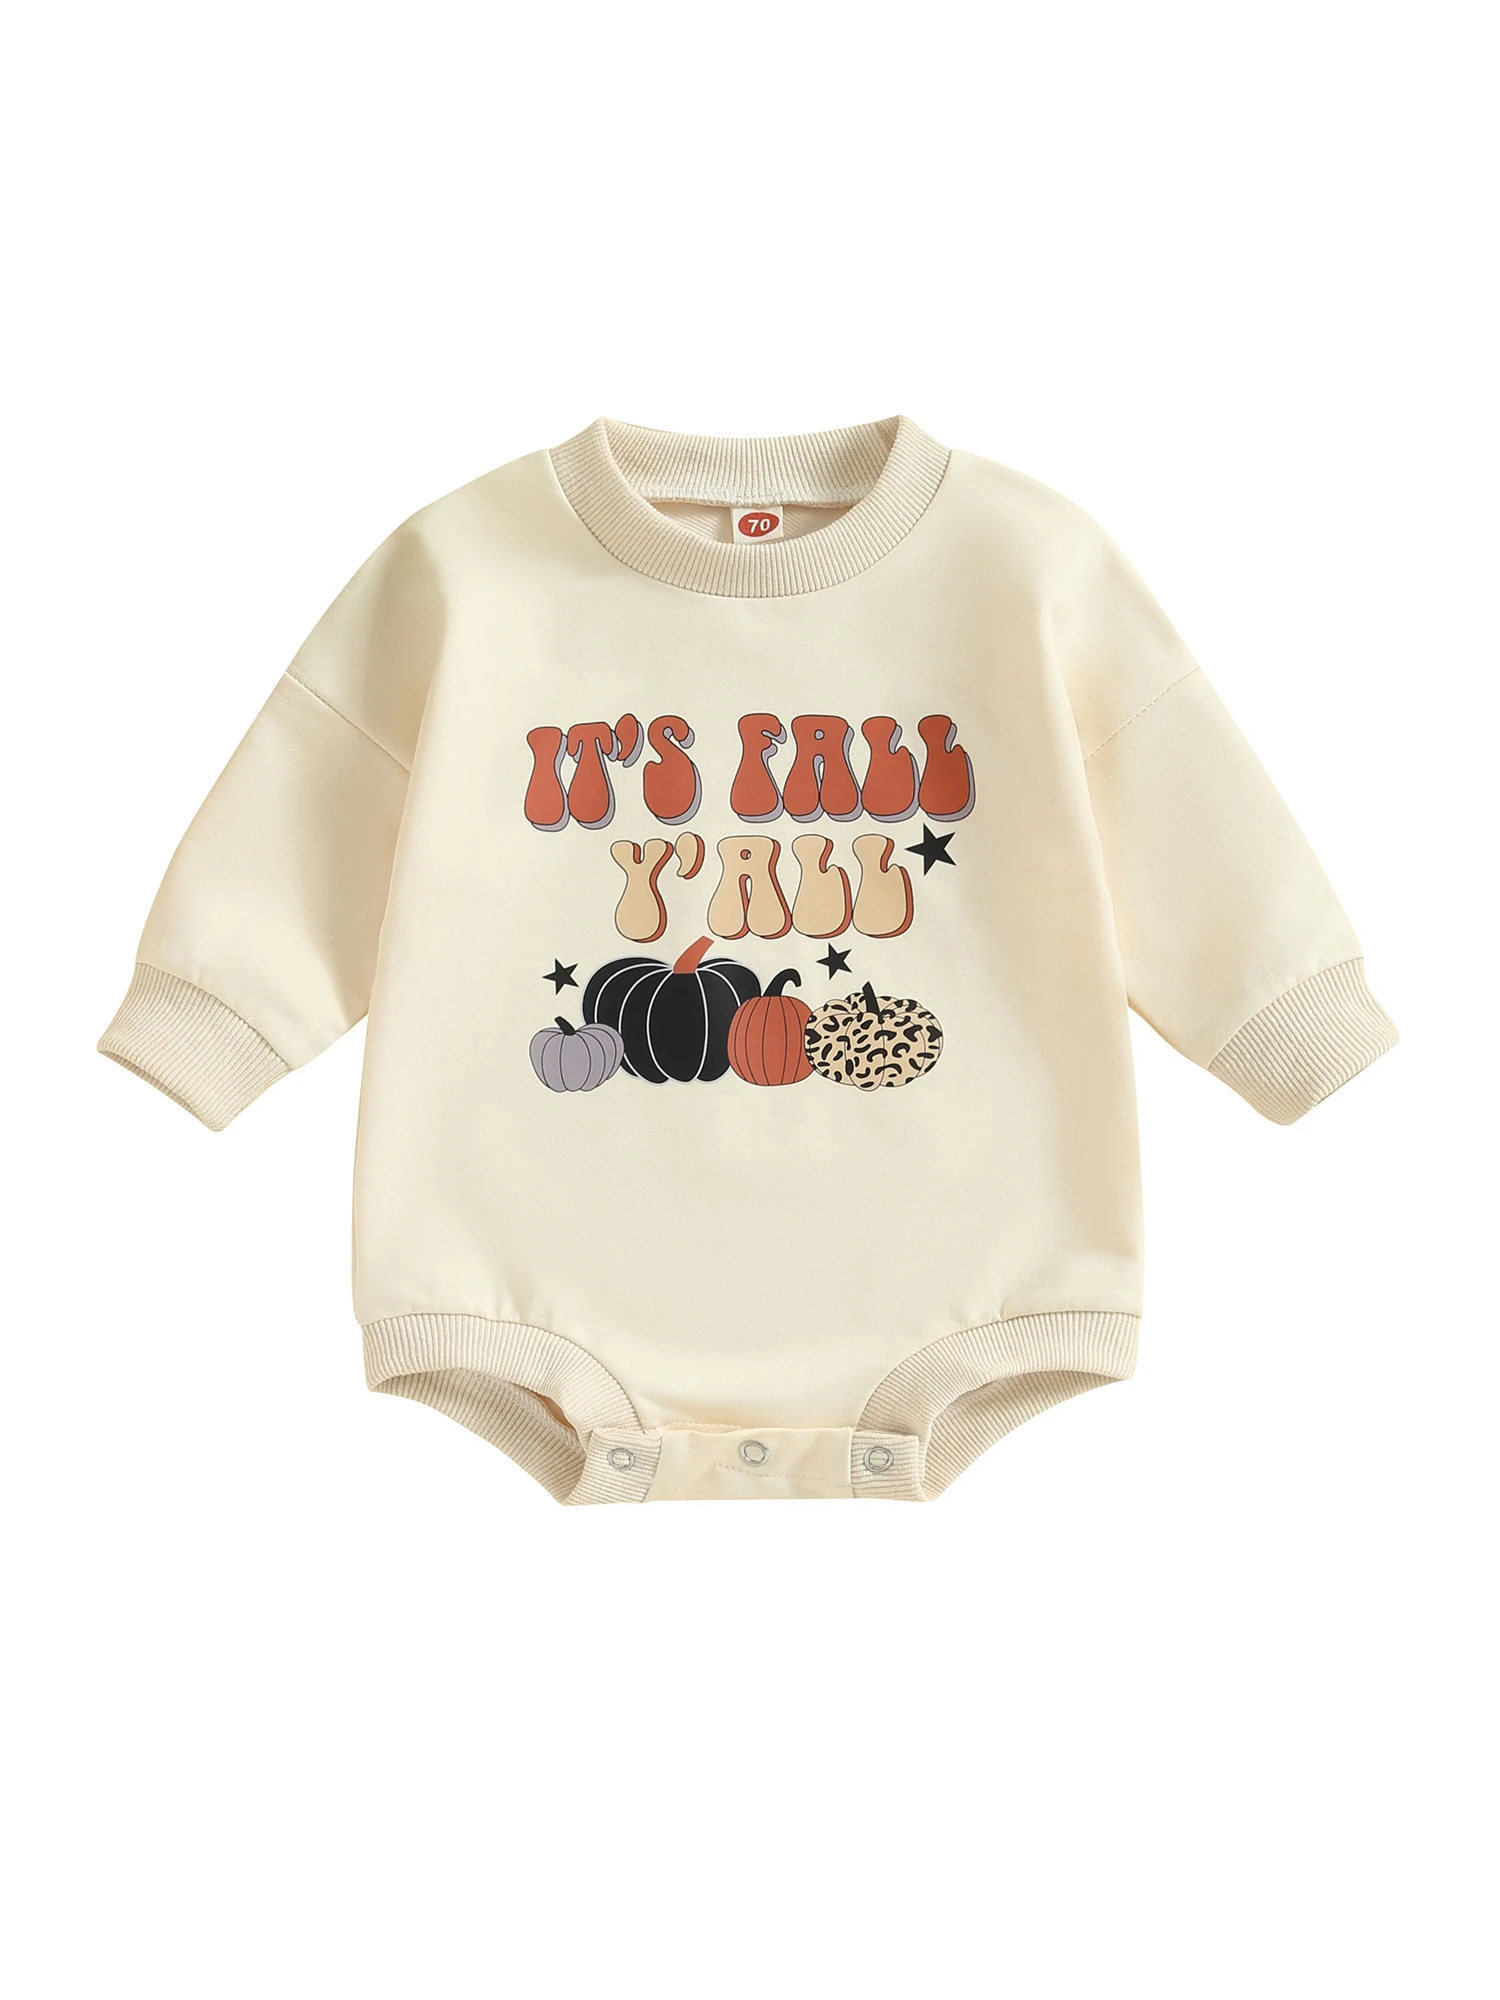 

Cute Pumpkin Patch Halloween Costume for Infants - Adorable Fall-Themed Romper with Sweater for Newborn Boys and Girls